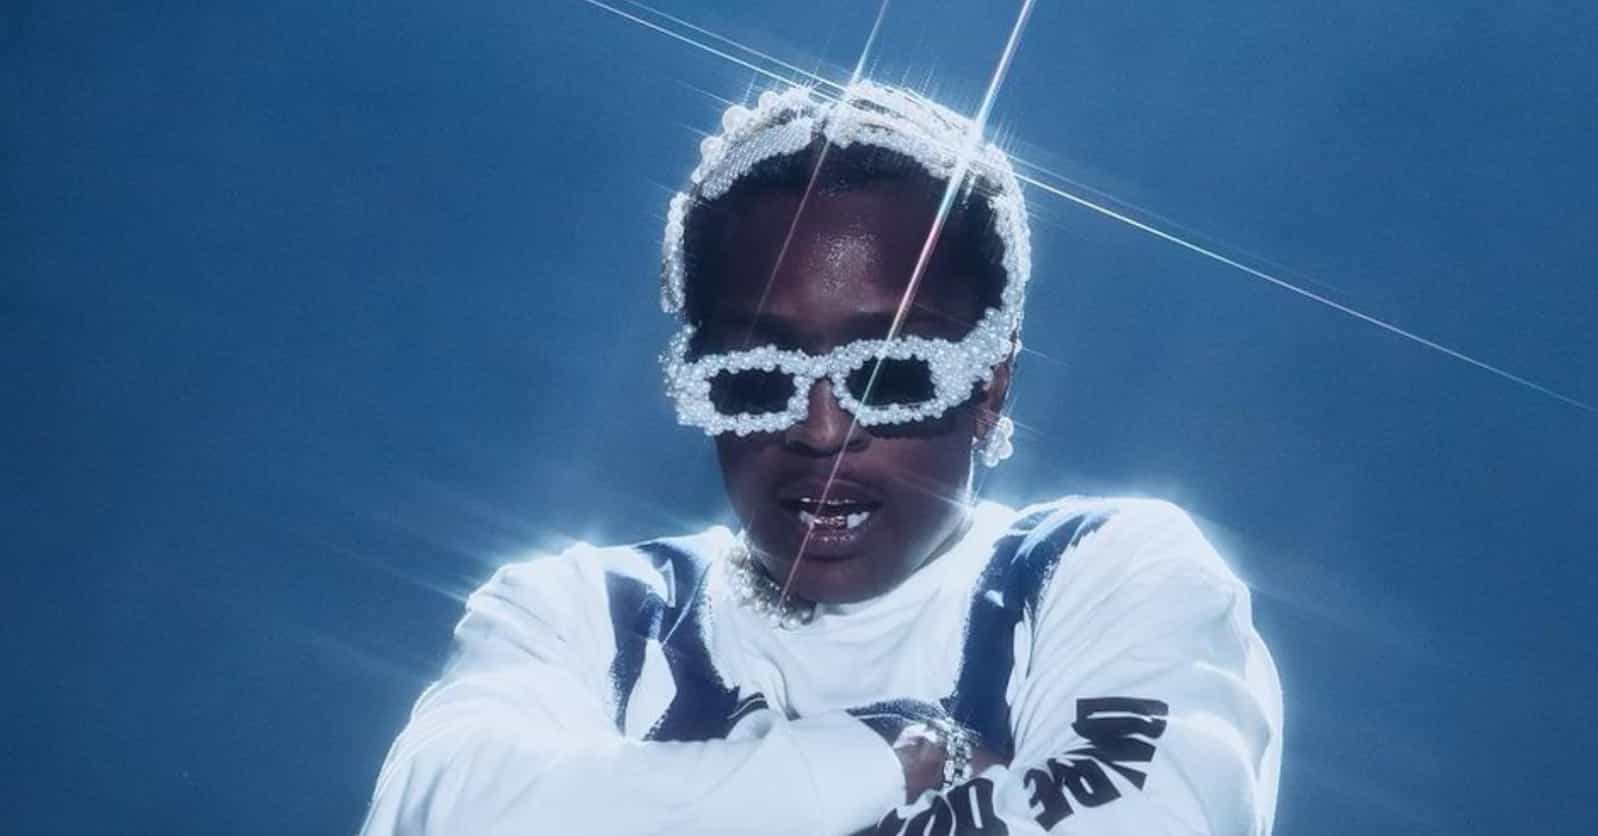 The Best A$AP Rocky Songs, Ranked by Fans